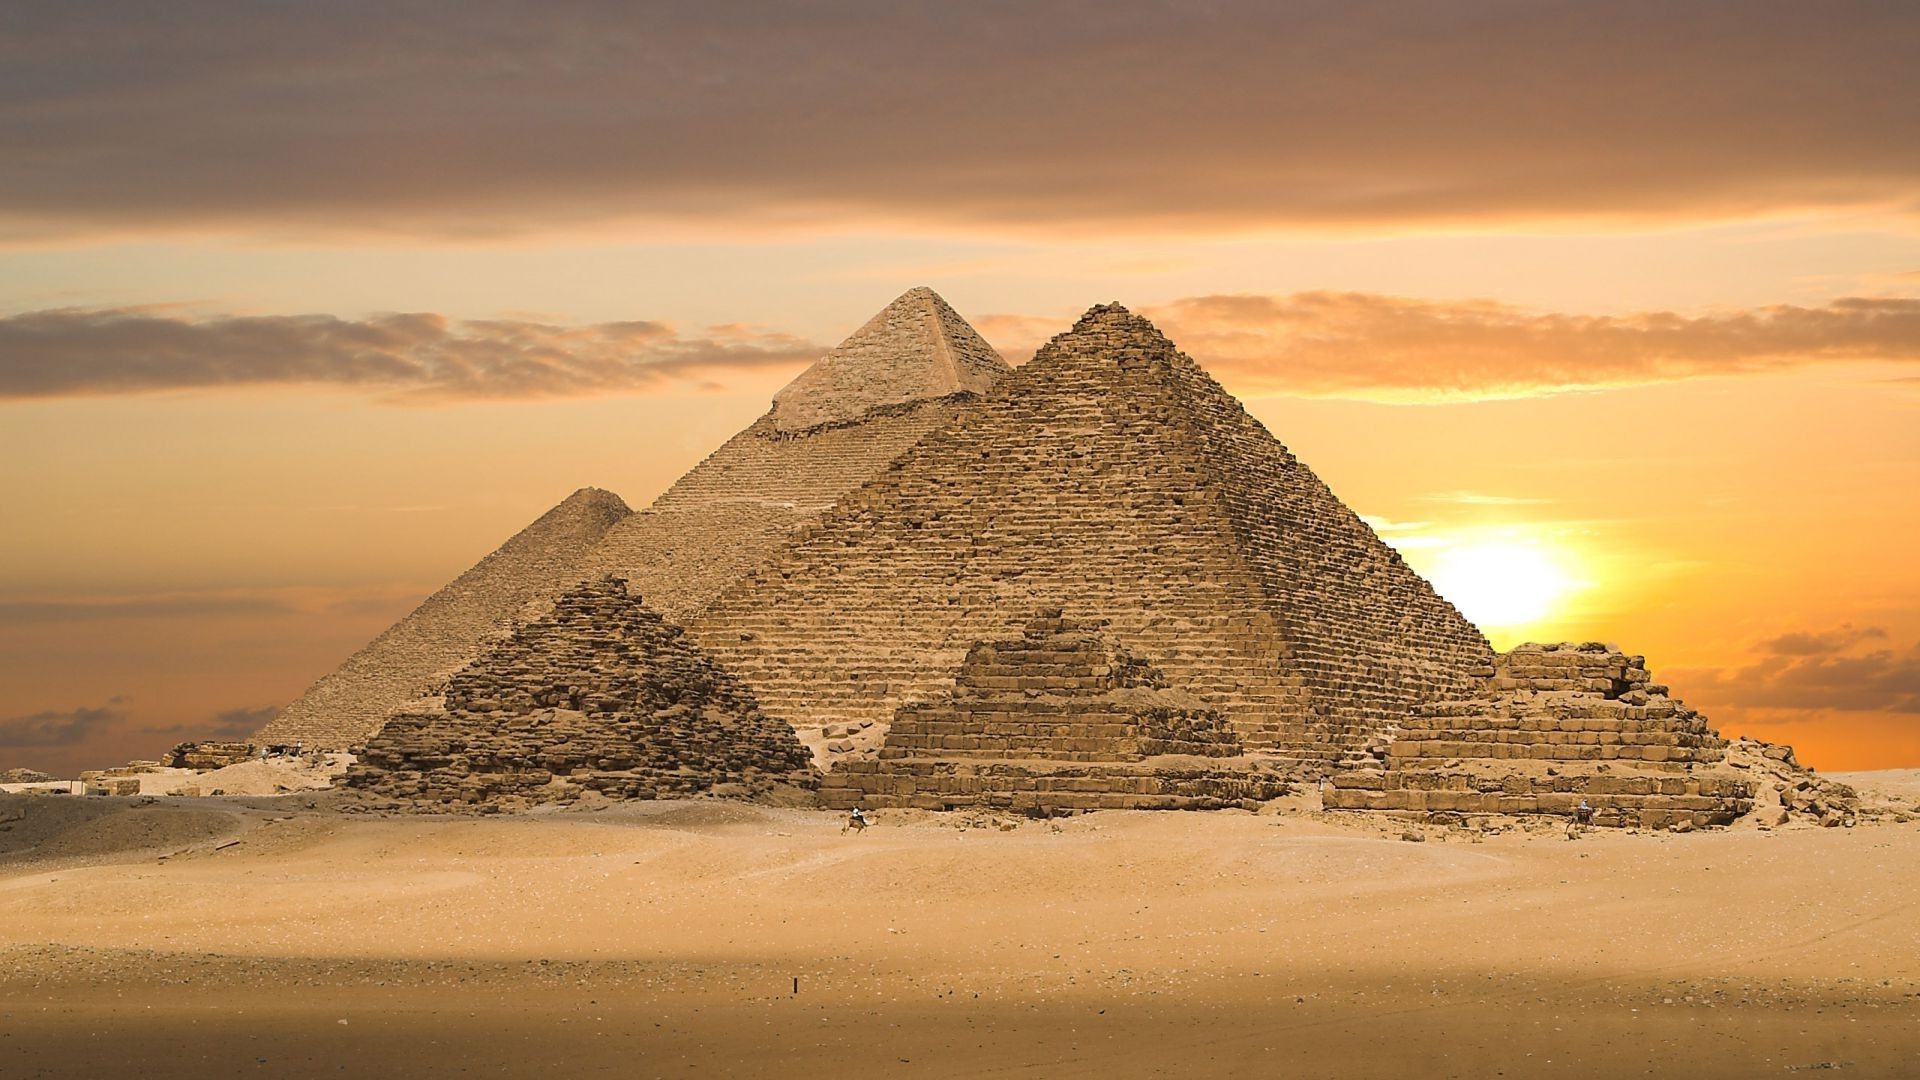 The great pyramids